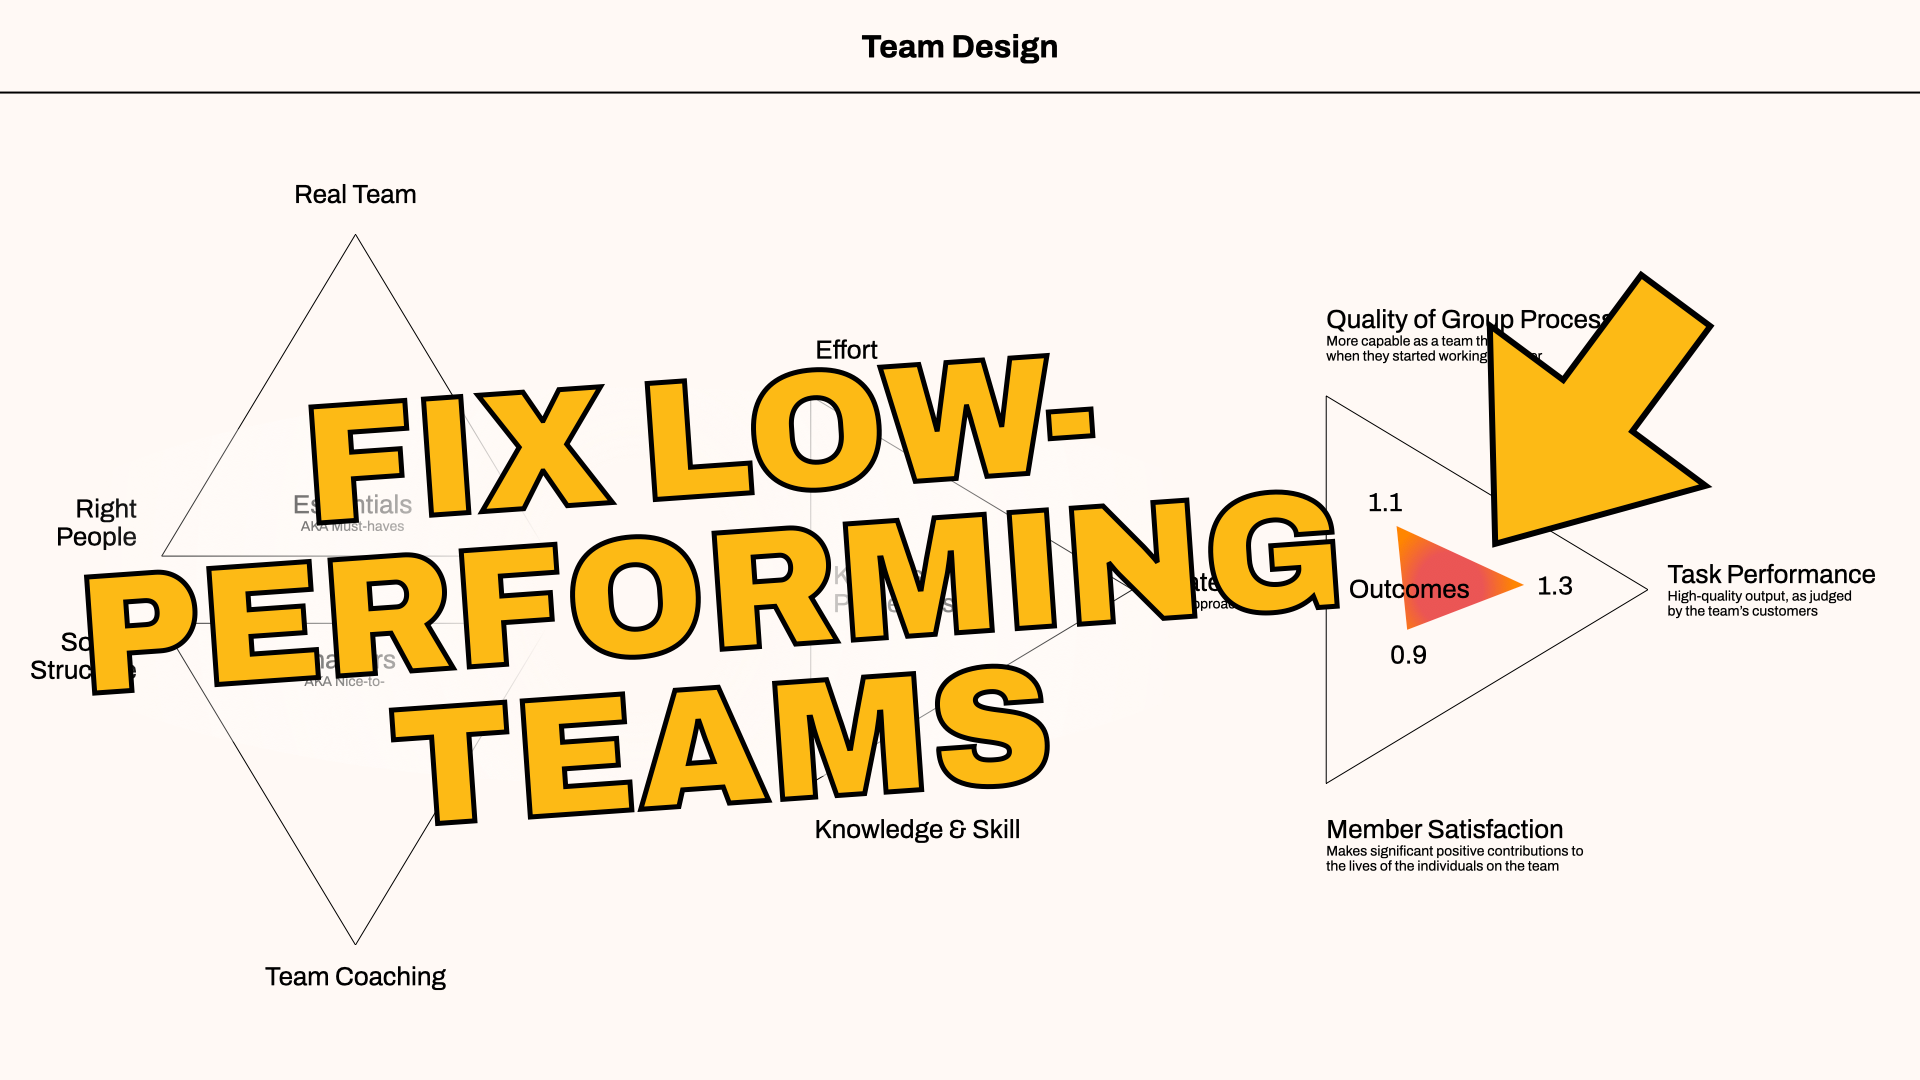 How to Improve Team Performance